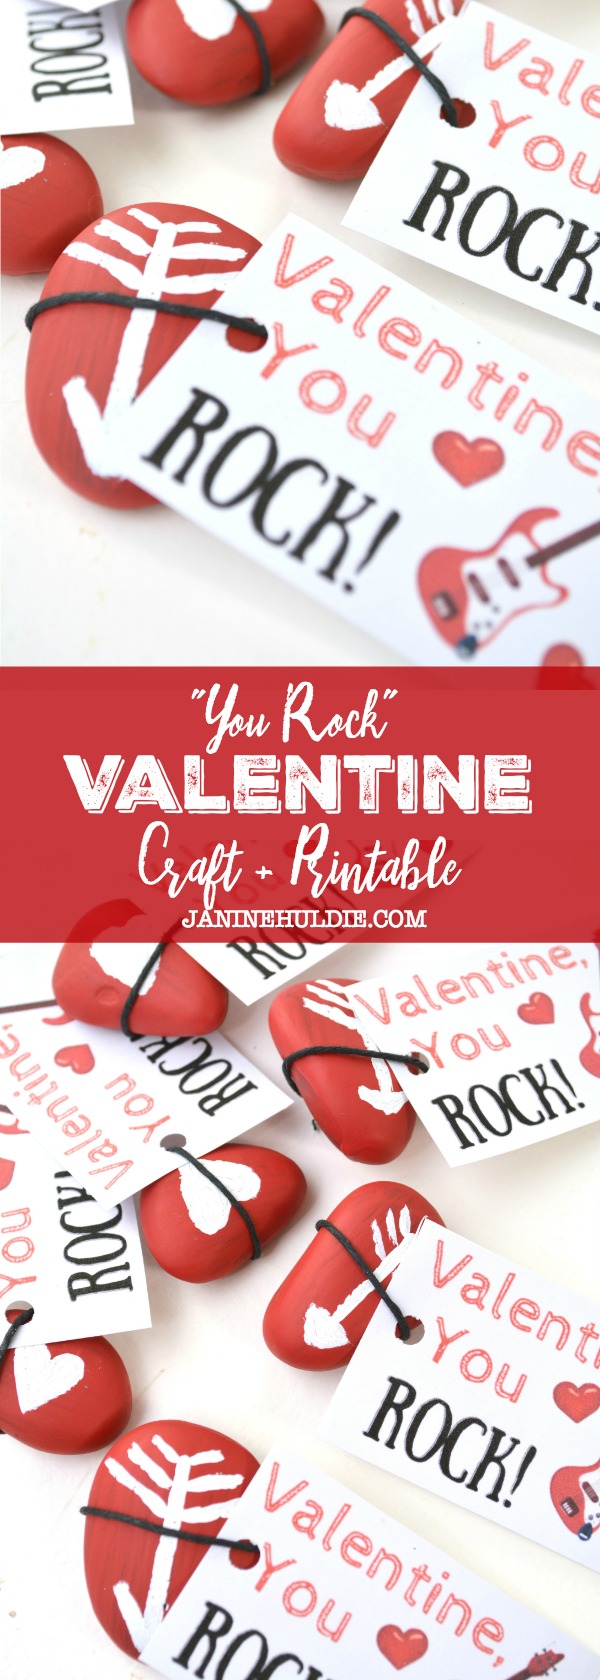 You Rock Valentine Craft and Printable